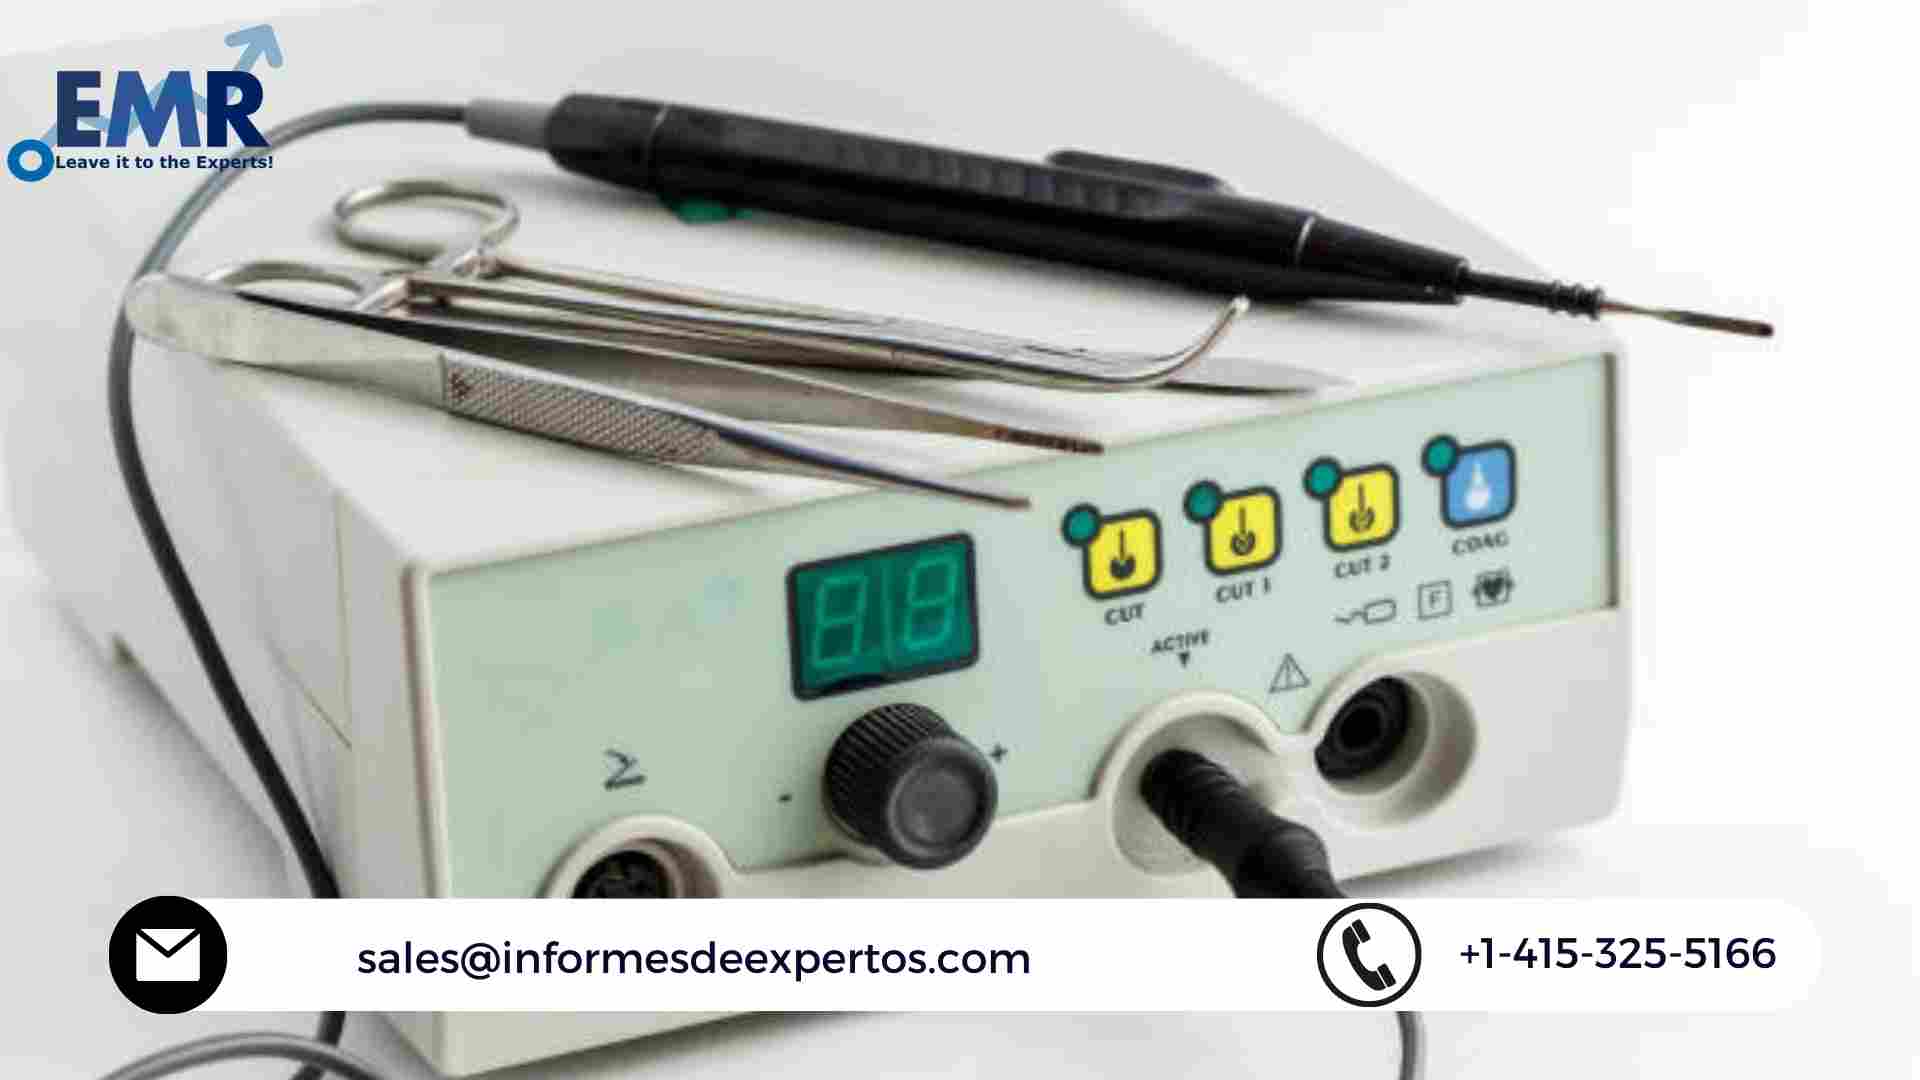 Electrosurgical Devices Market